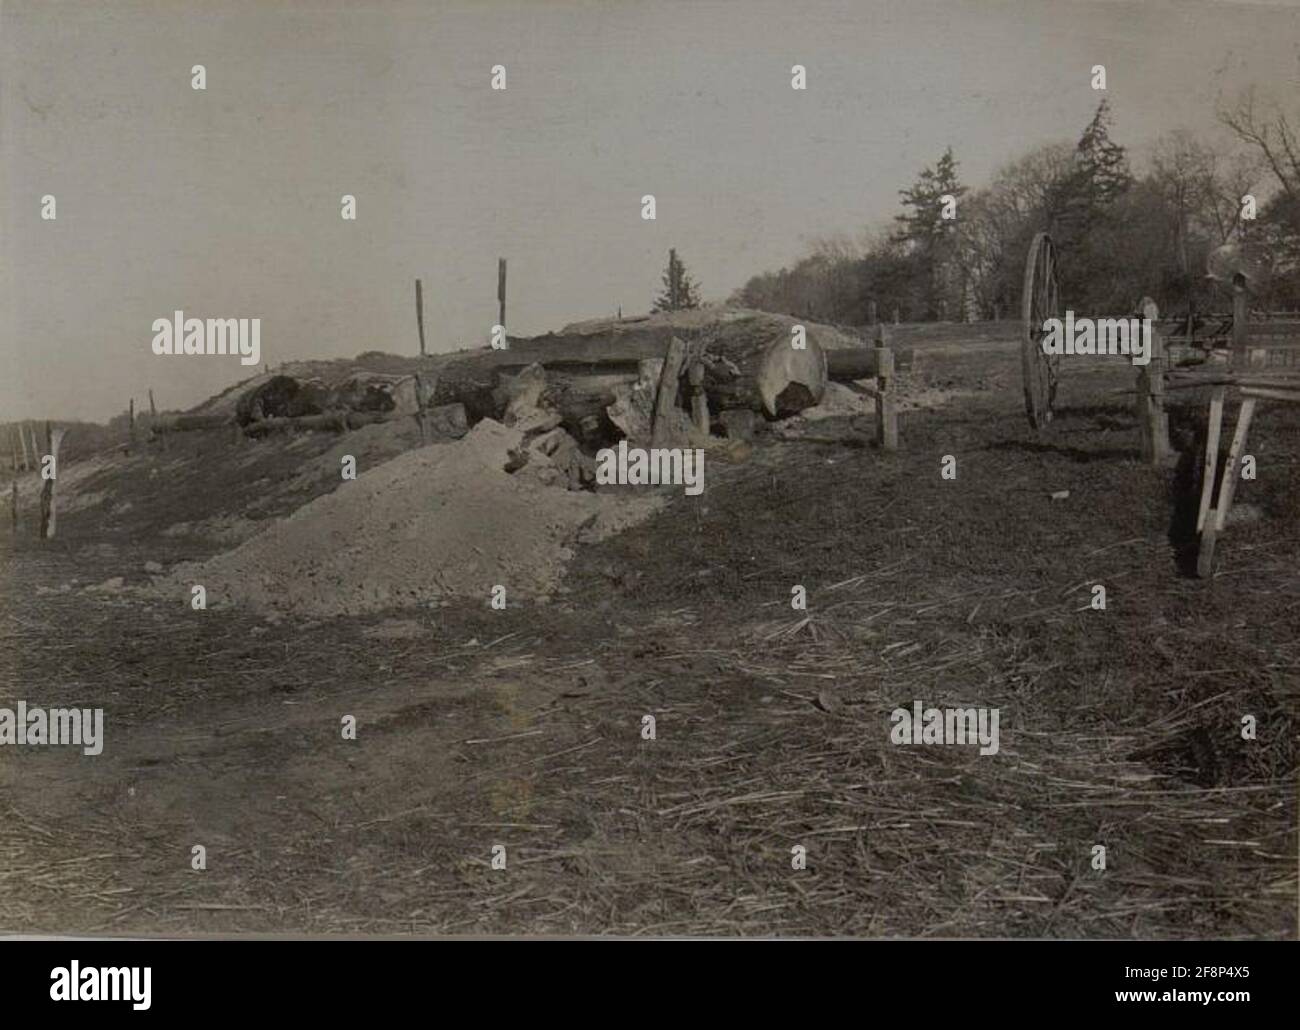 Bomb-proof coverage of the 3rd infantry division at Chorlupy, taken on ...